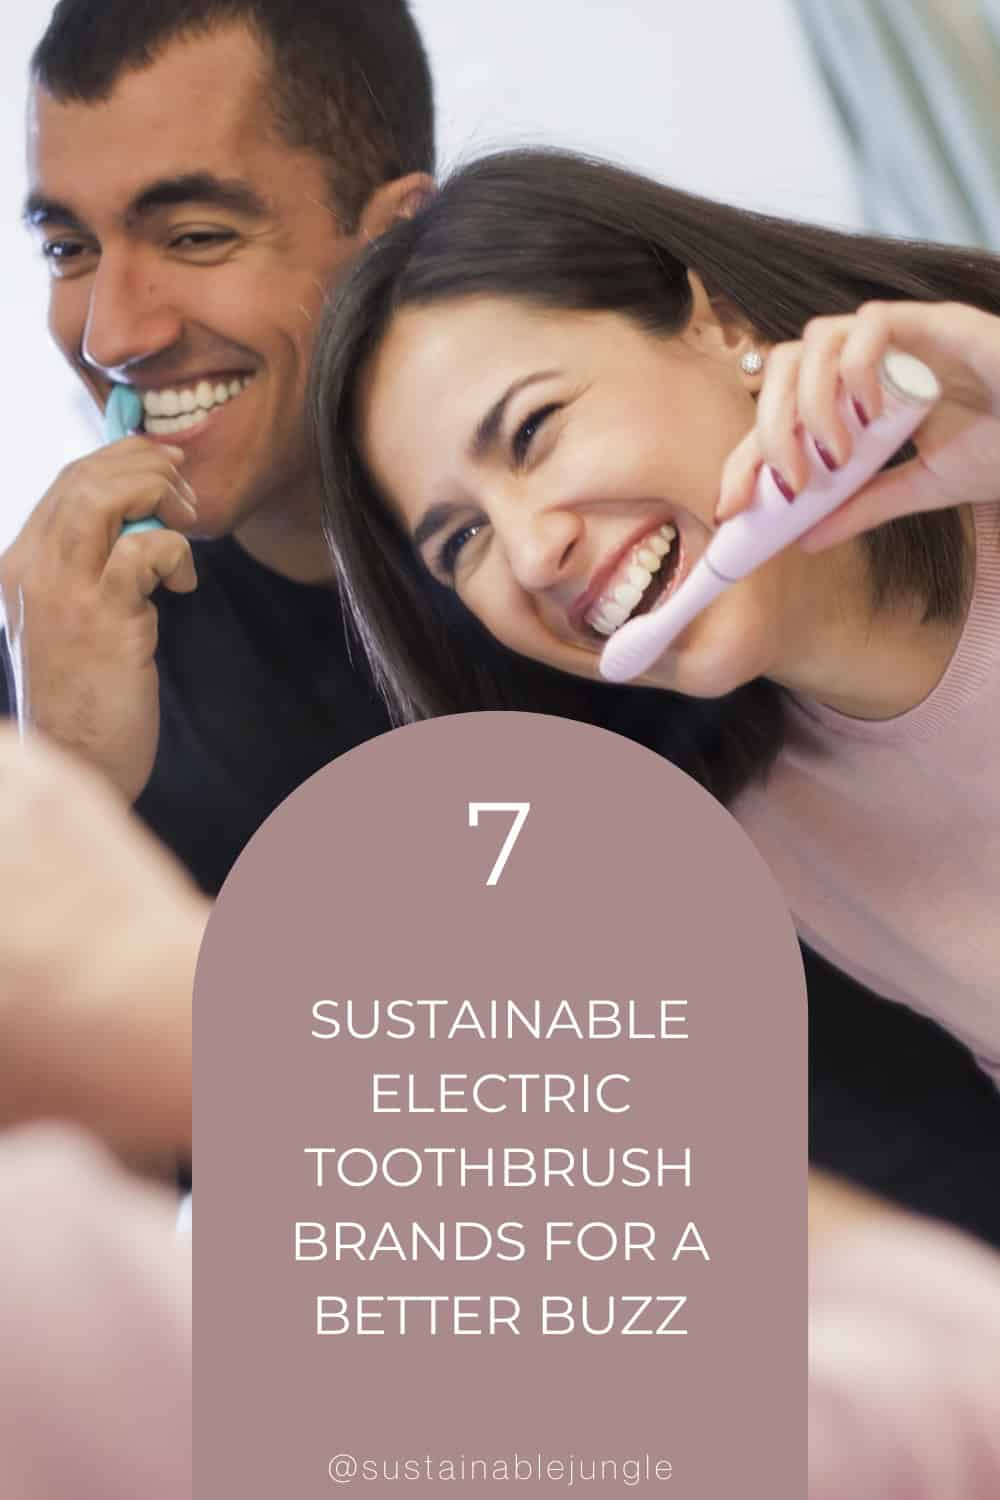 7 Sustainable Electric Toothbrush Brands For A Better BuzzImage by FOREO#sustainableelectrictoothrbrush #electrictoothbrushsustainable #ecofriendlyelectrictoothbrush #ecofriendlytoothbrushheads #ecoelectrictoothbrush #bestsustainableelectrictoothbrush #sustainablejungle